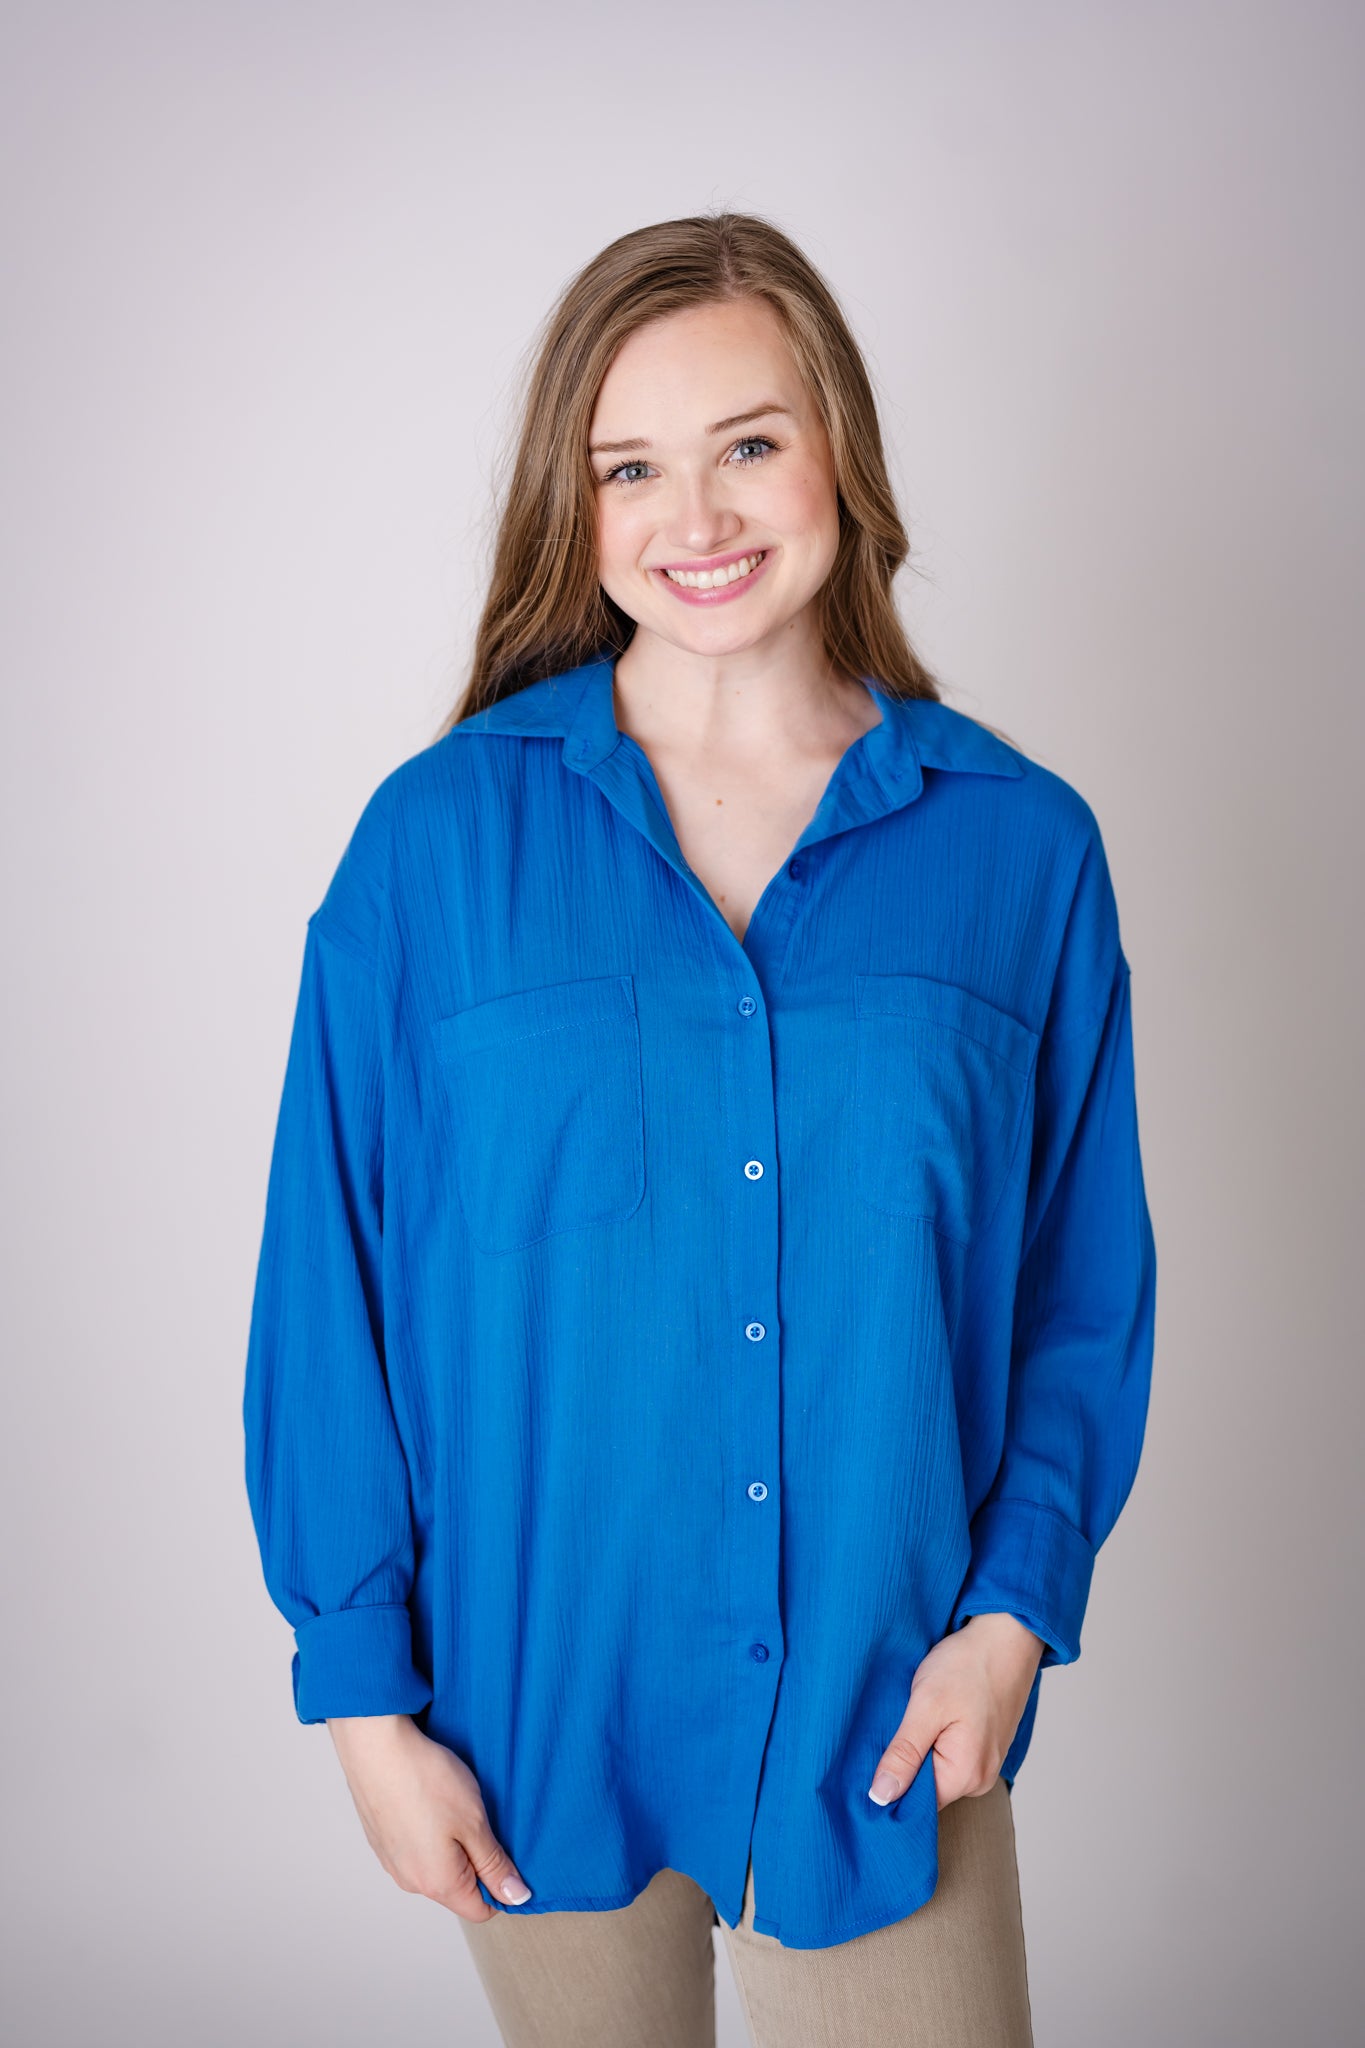 Lalo Button Up Top - Federal Blue